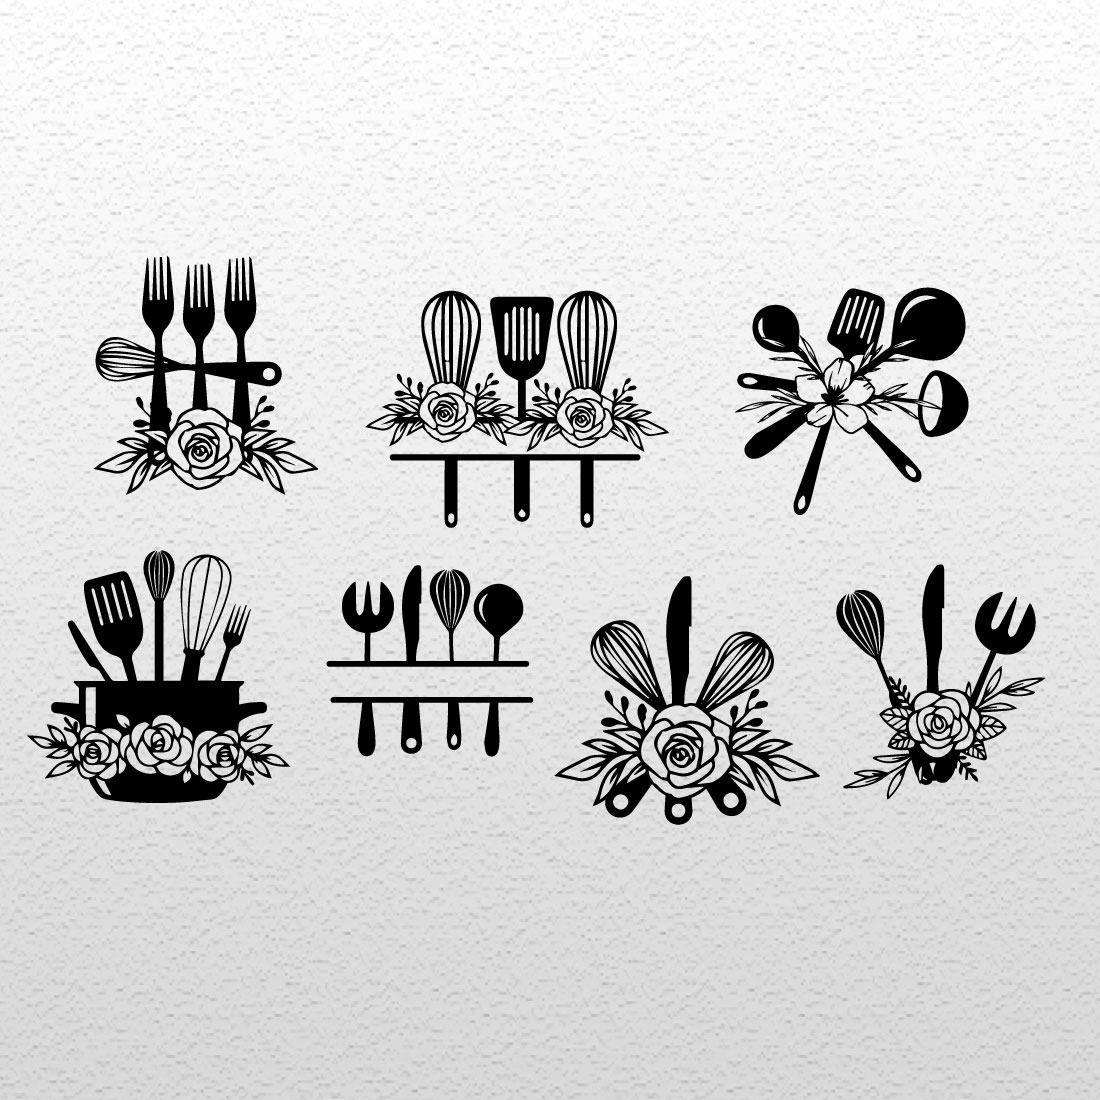 Collection of black marvelous images of kitchen utensils